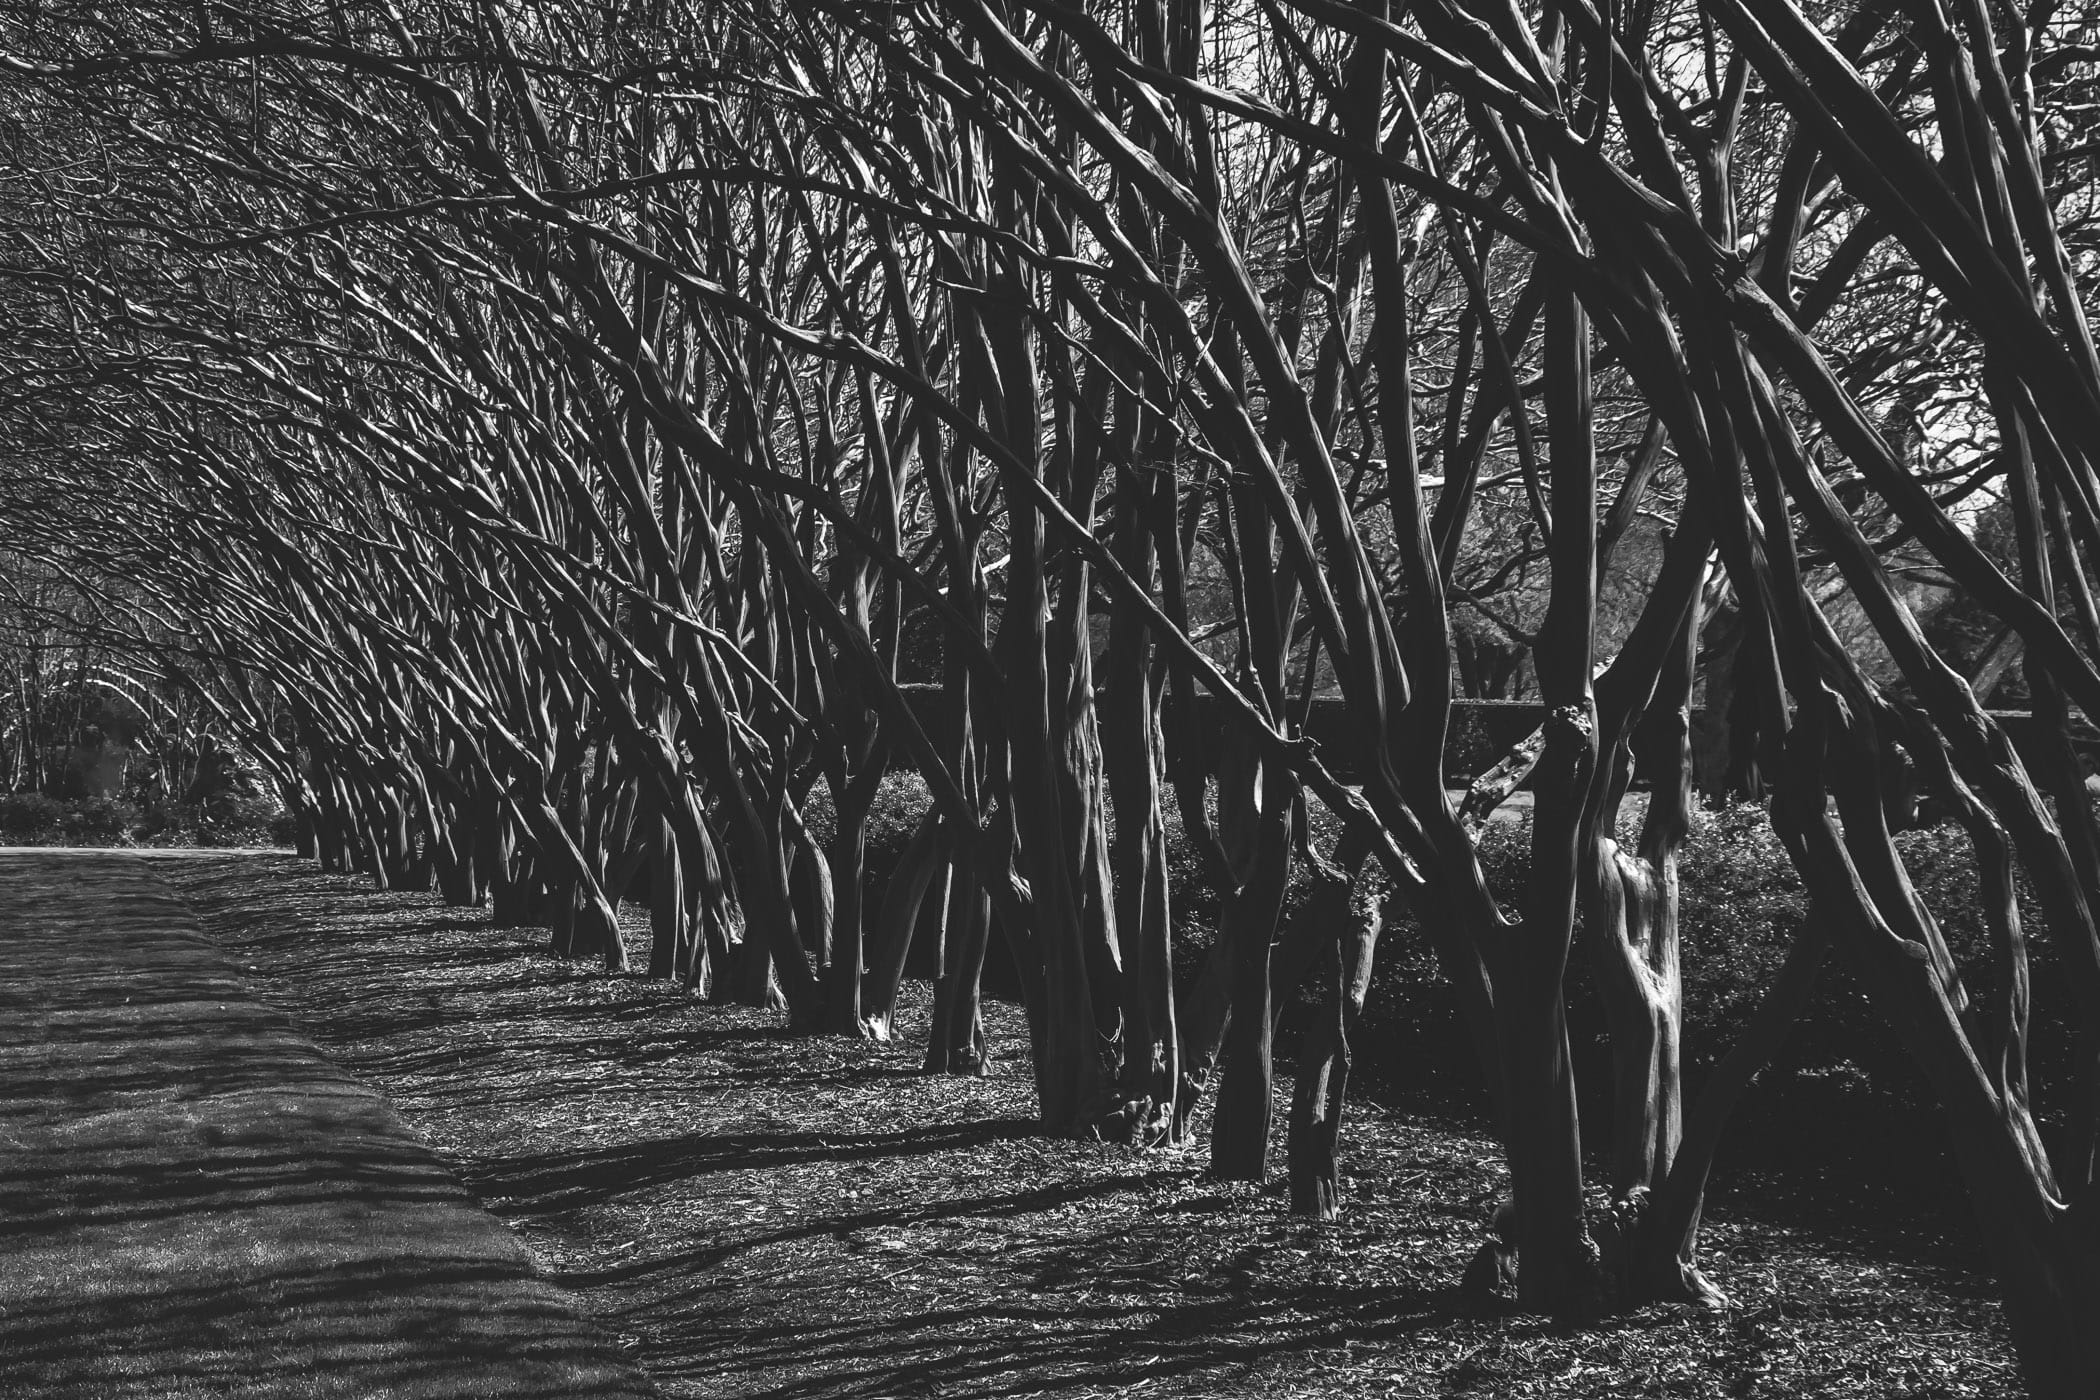 A row of trees at the Dallas Arboretum.